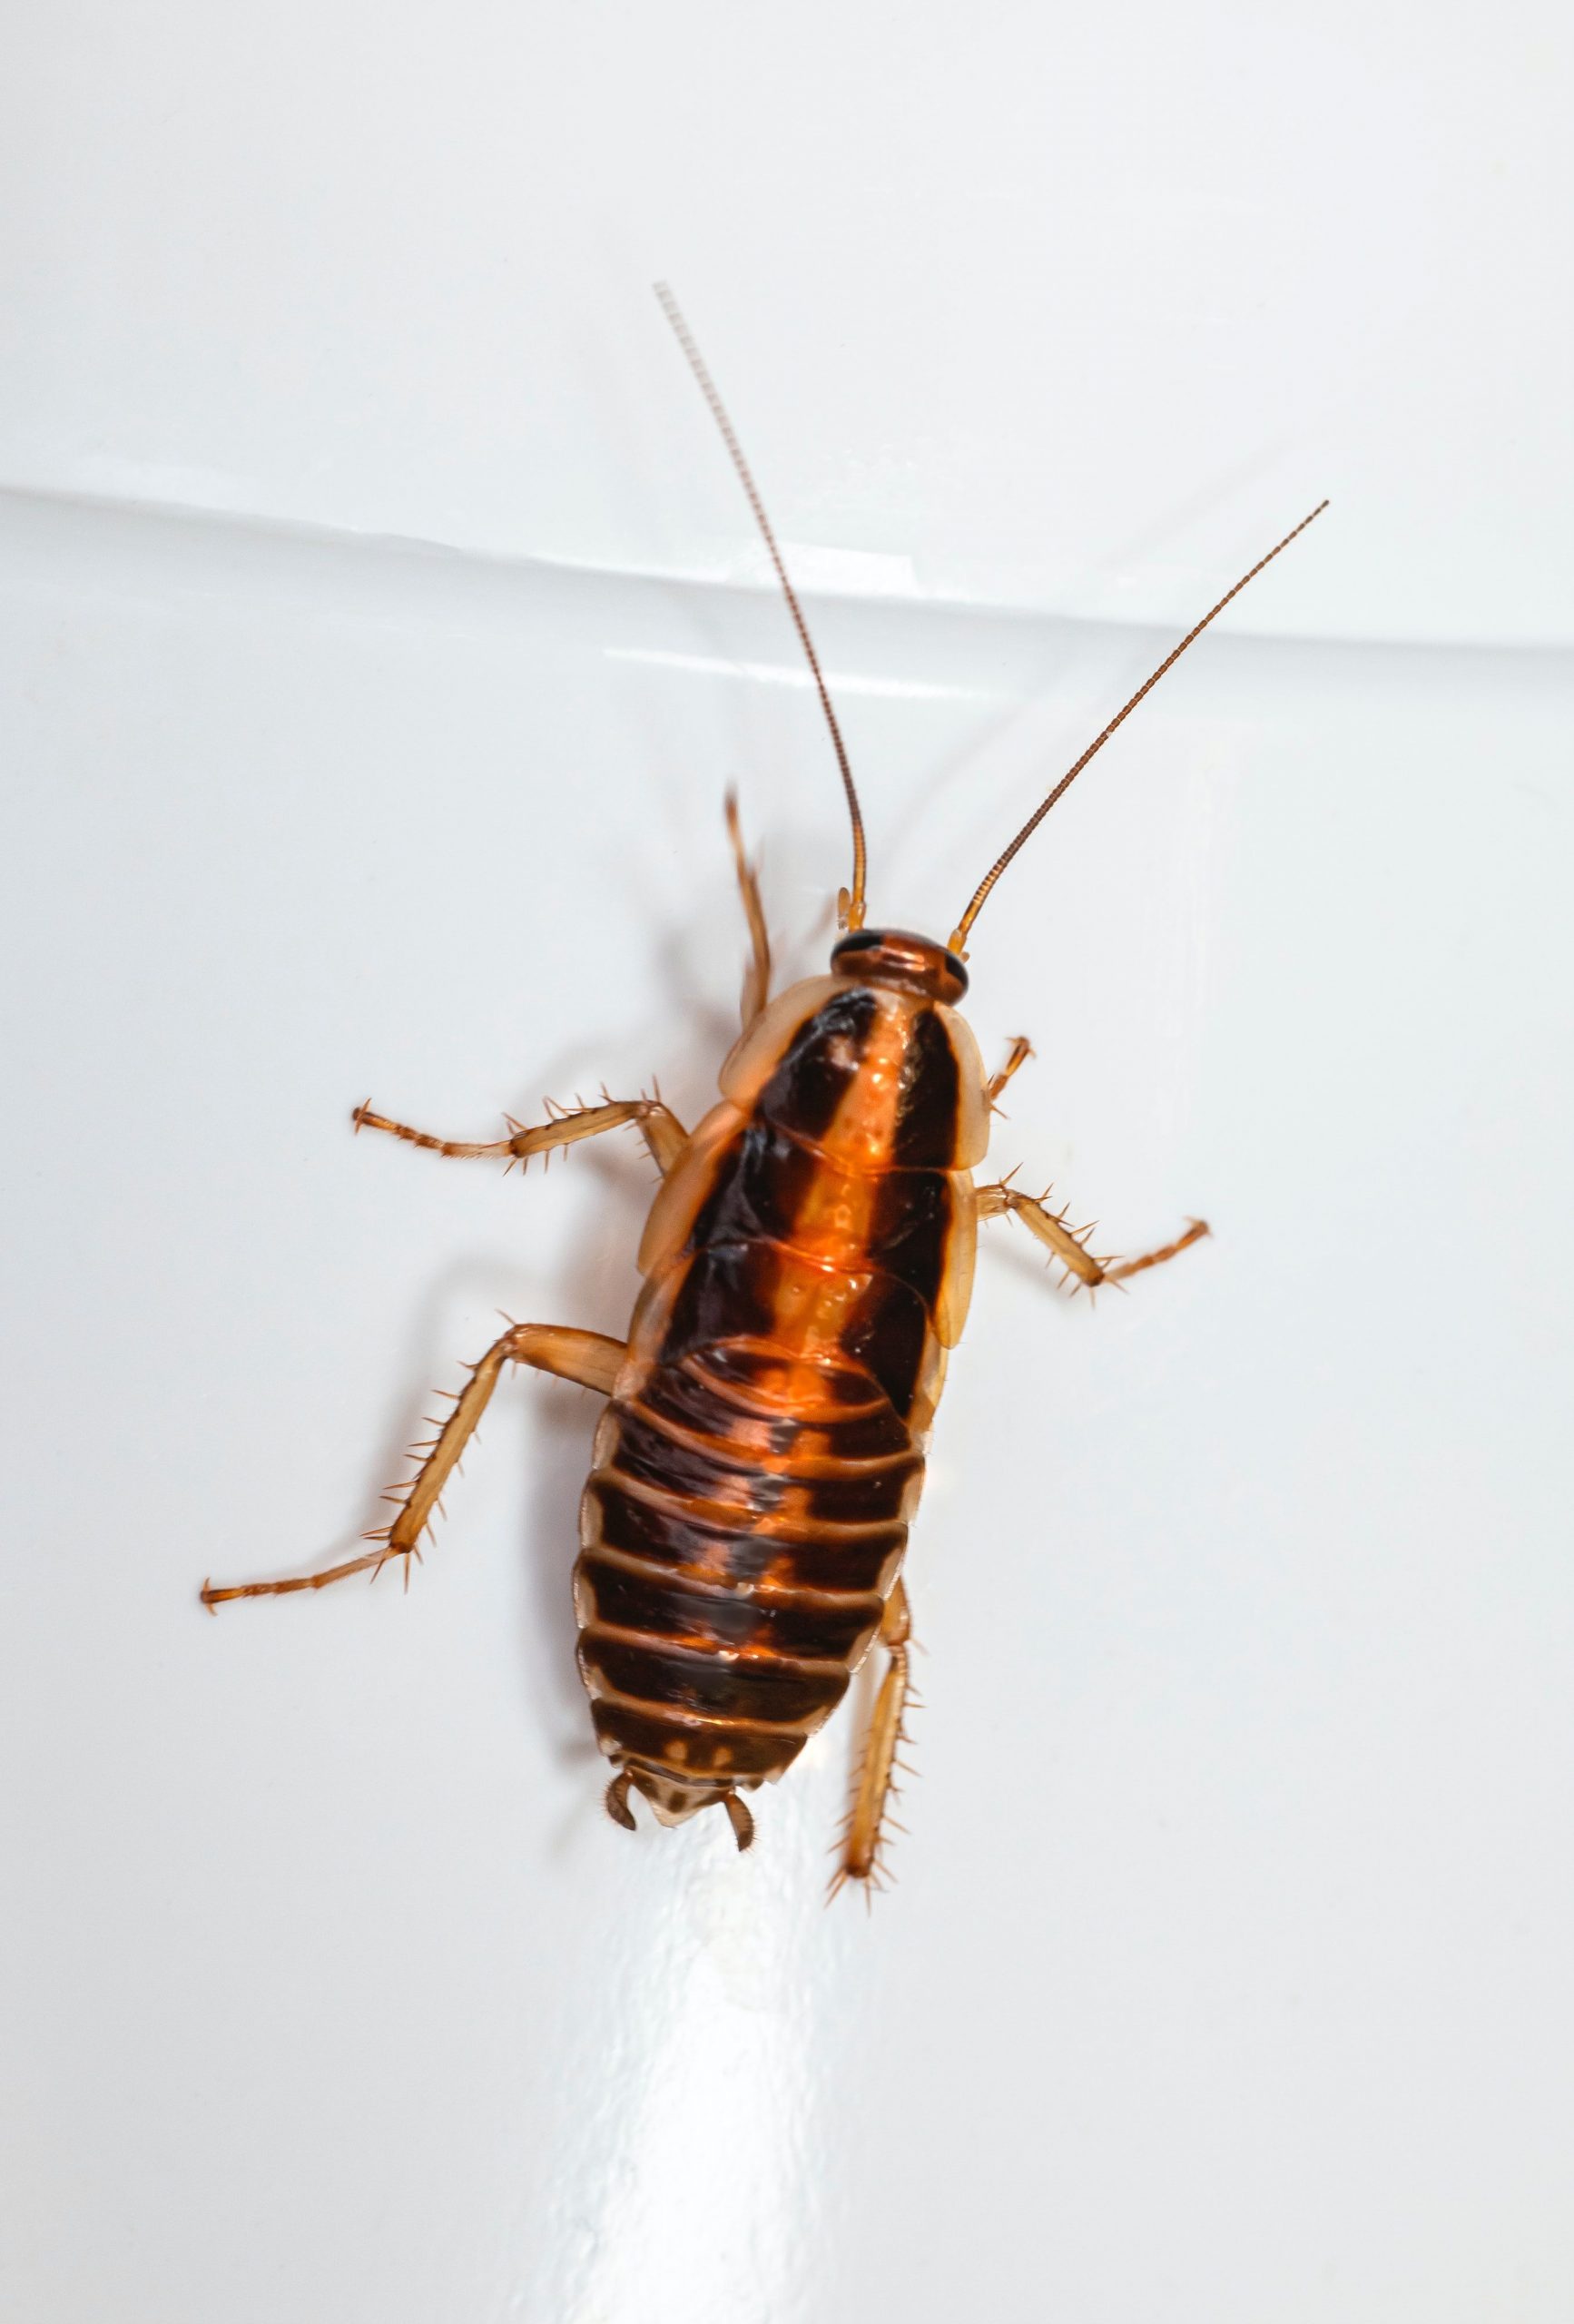 New Zealand man gets cockroach extracted from his ear, leaves doctor confused